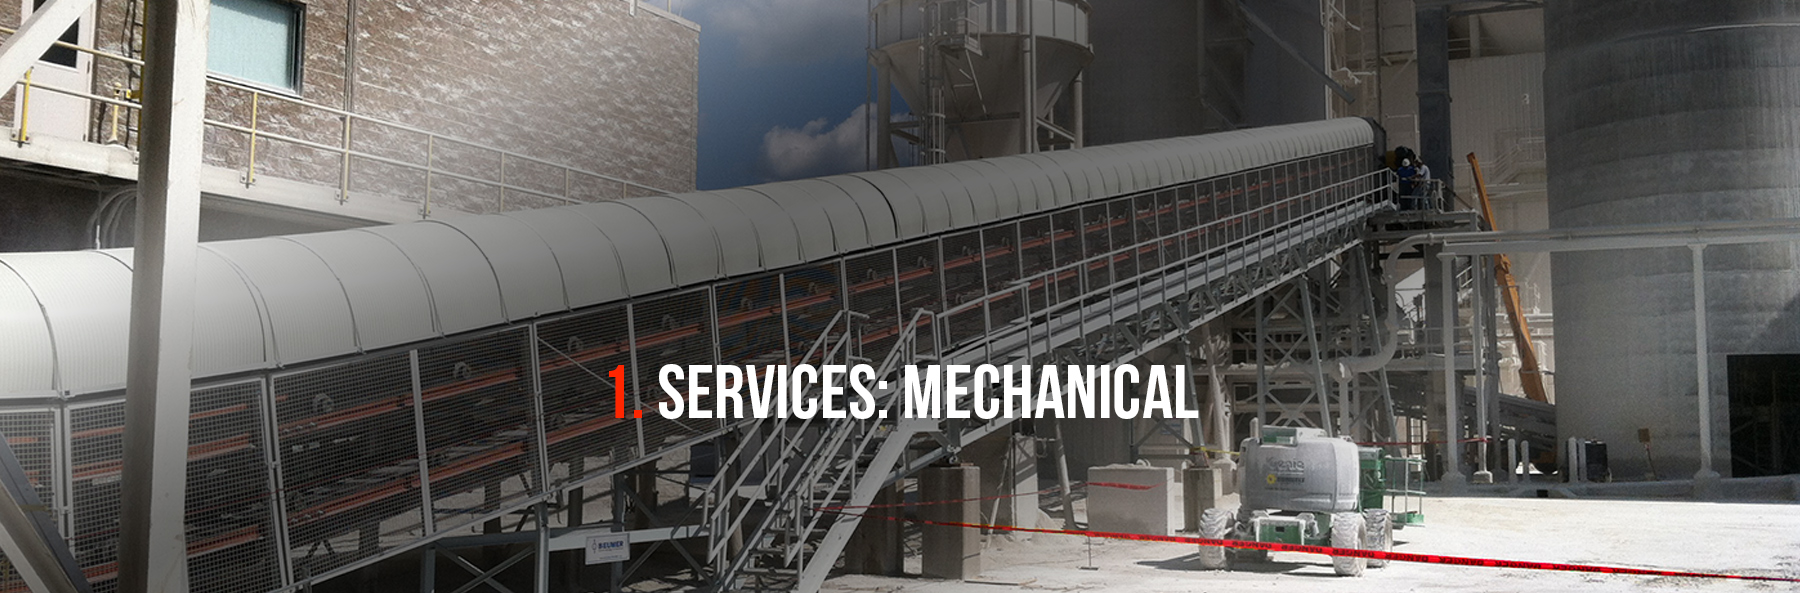 Services: Mechanical